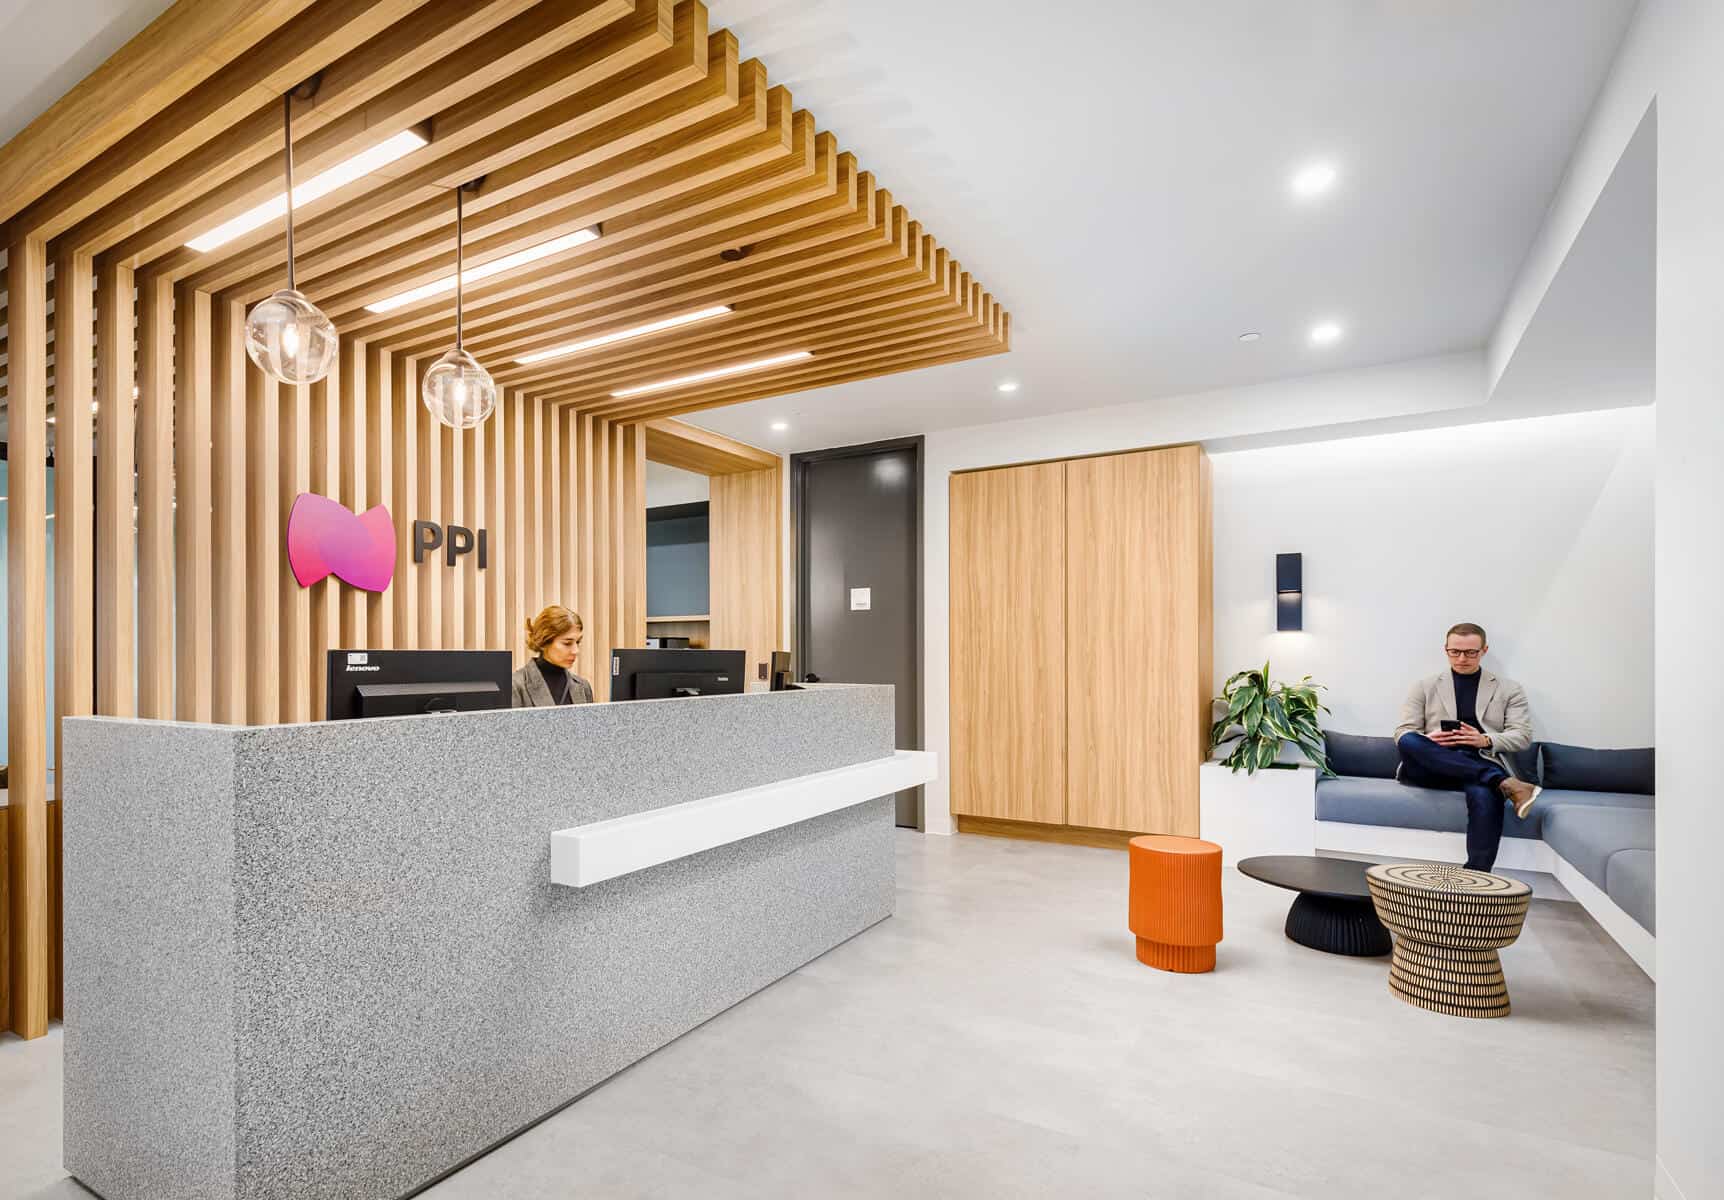 Modern office reception area with a man and a woman, stylish wooden accents, entrance desk, seating area, and hanging lights following an office renovation.